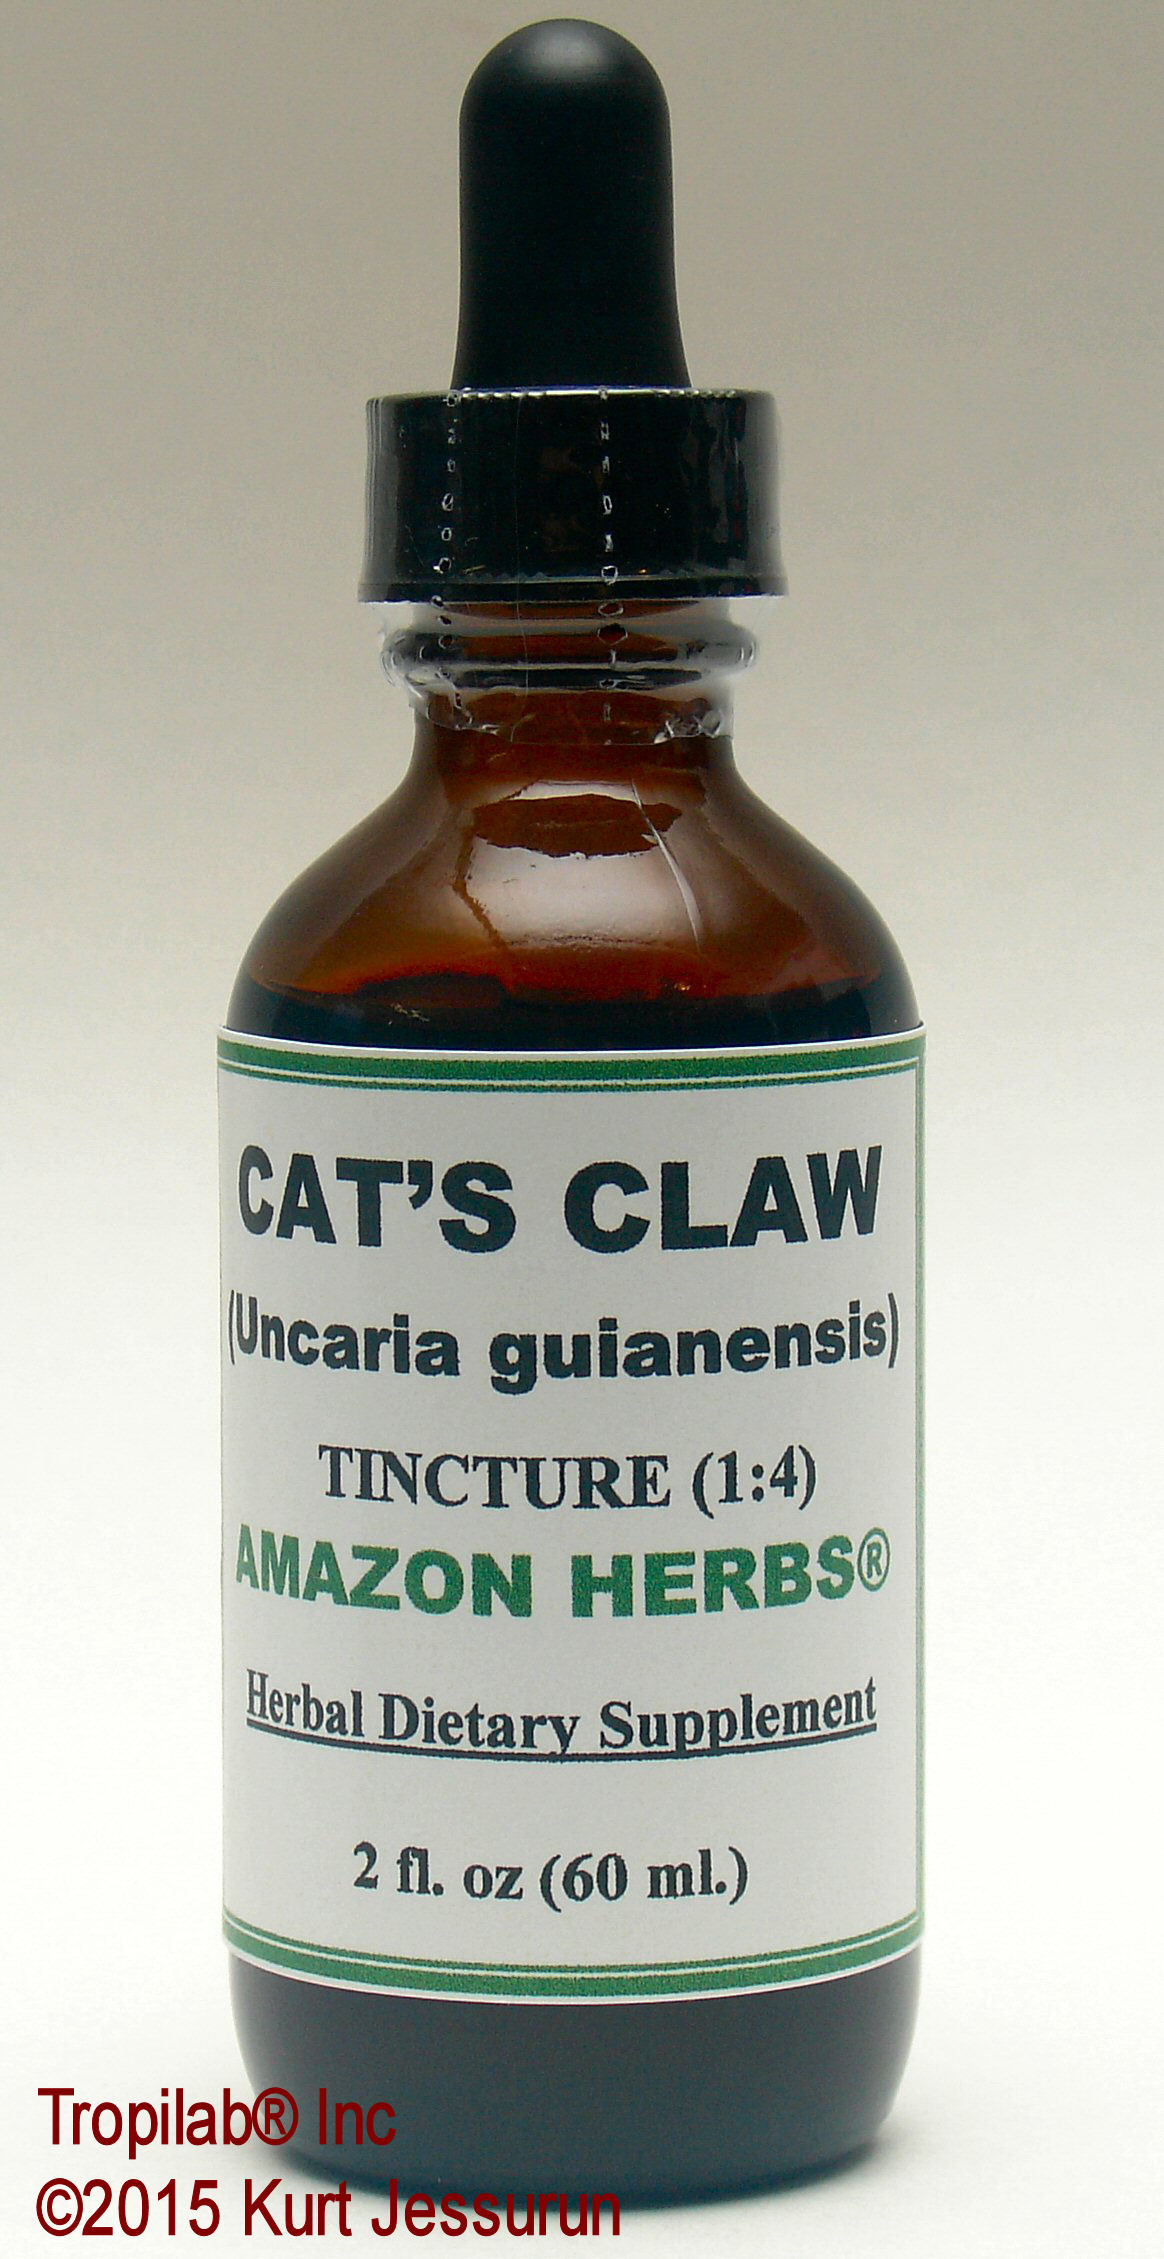 Uncaria guianensis, Cat's claw tincture - Tropilab. Cat's claw tincture and tea; inner-bark from the woody stem and root, 
natural remedy for boosting the immune system. Also may help to lower blood pressure.